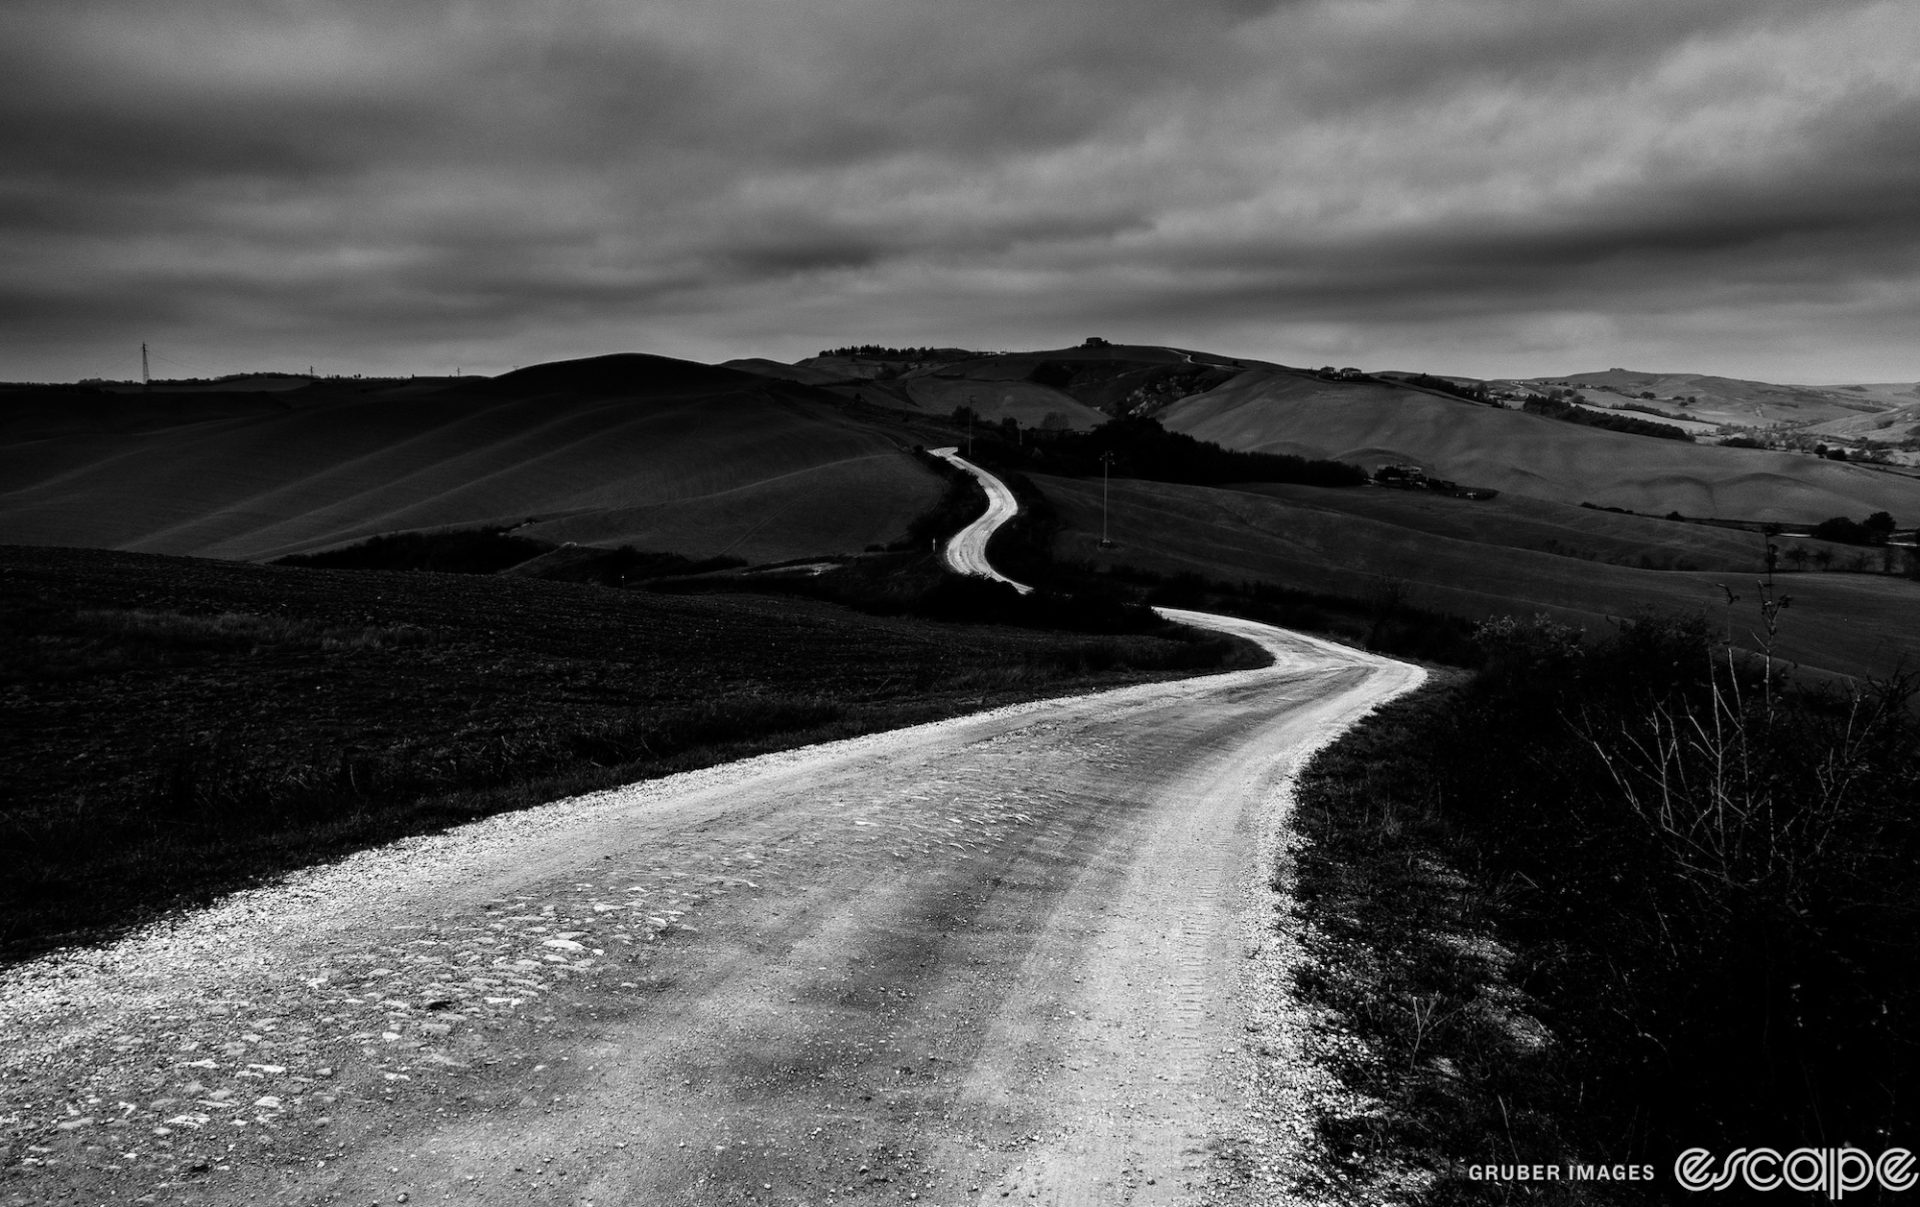 A black and white shot of a gravel road winding away in the distance over rolling hills. The fields are dark, as is the cloudy sky and it has a sense of foreboding.